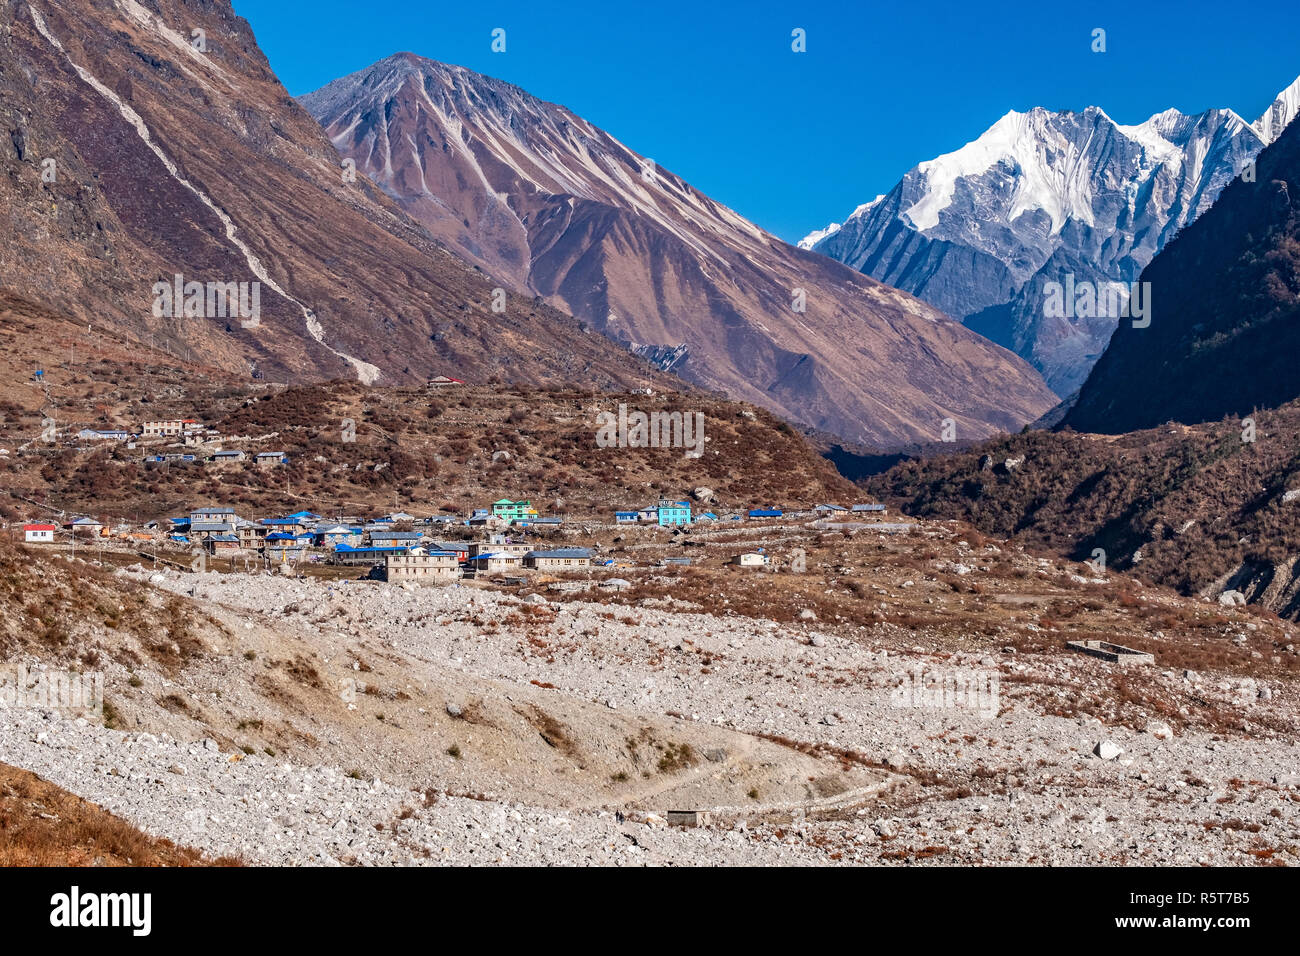 The photo shows the Langtang village, which is rebuilt after the earthquake 2015. The foreground shows the rubbish of the earthquake, which has burrie Stock Photo